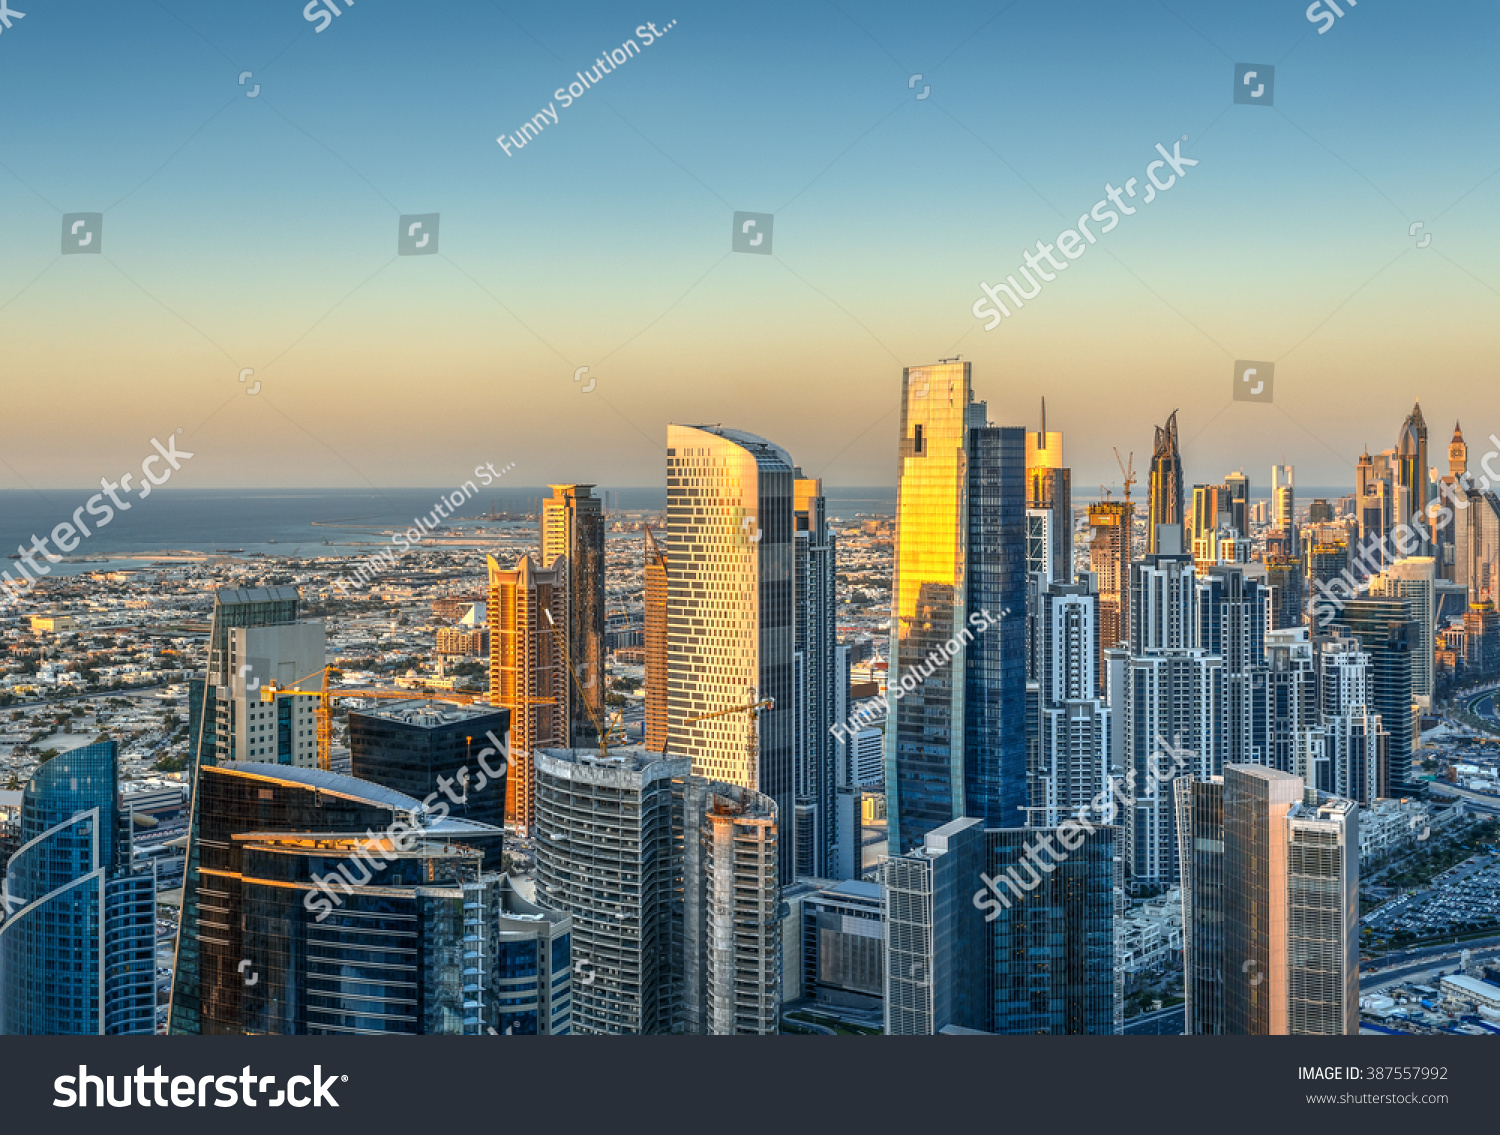 Beautiful skyline with modern architecture at sunset. Aerial view of Dubai business bay towers. #387557992